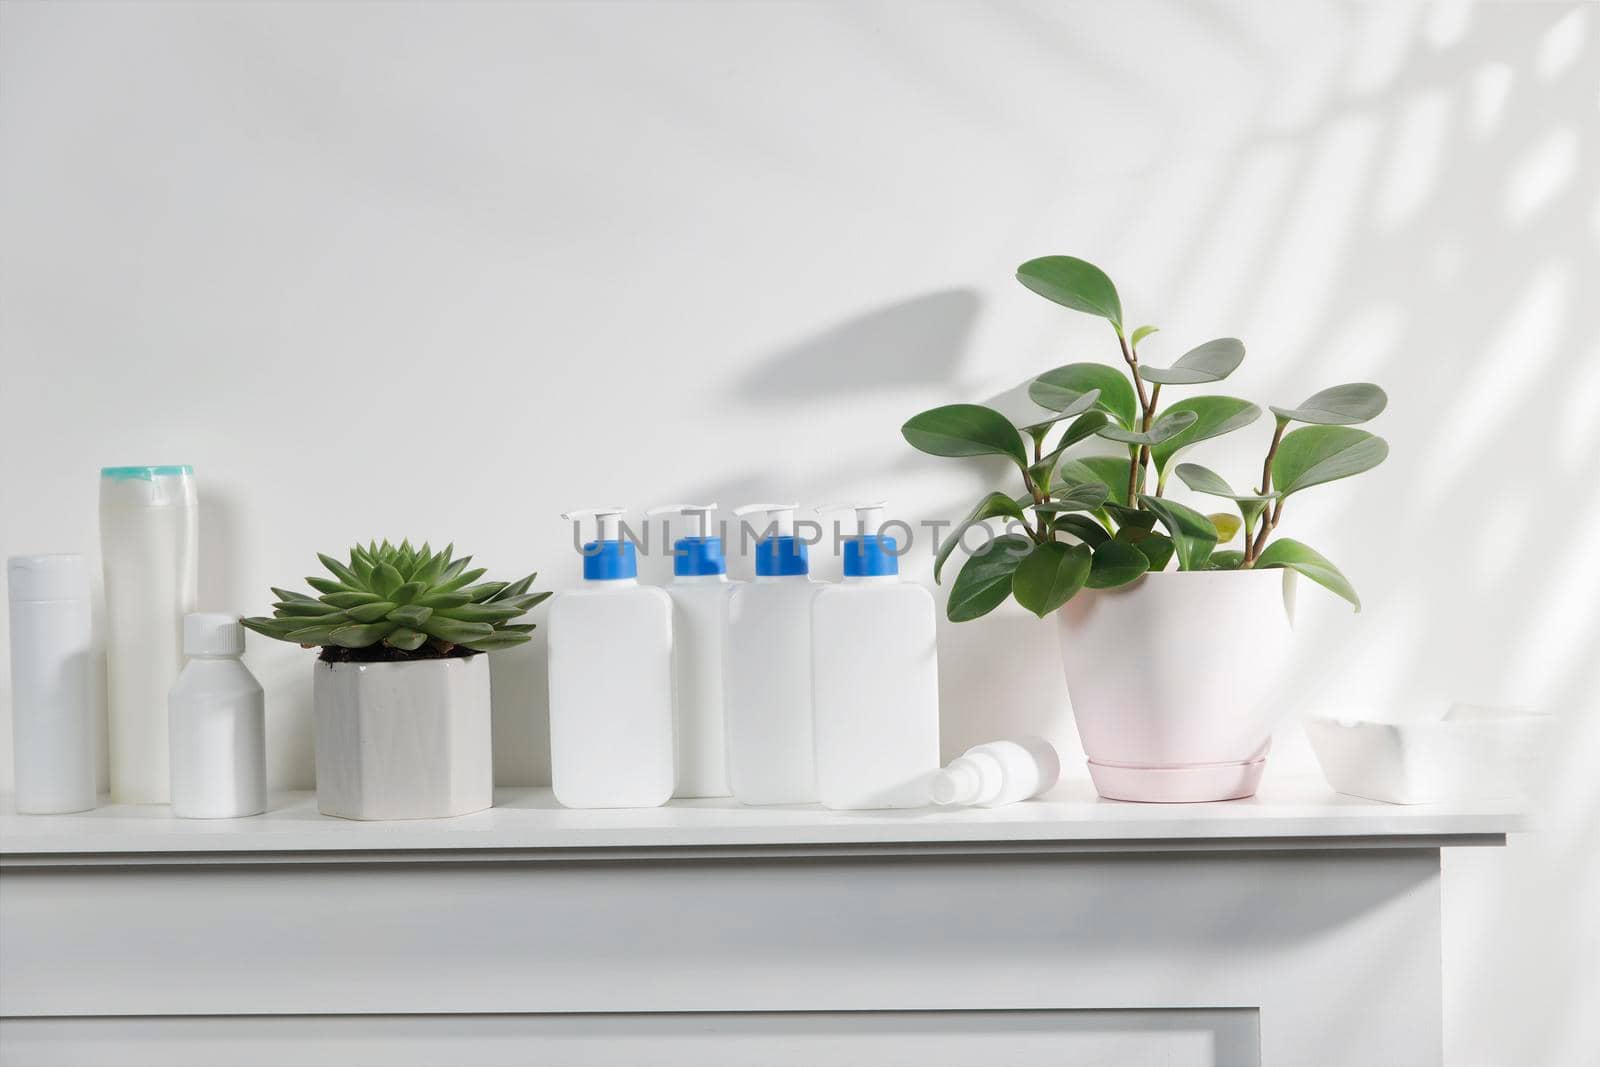 Peperomia Magnoliifolia in the pot. White bottles with a blue dispenser with shampoo, conditioner, cream and liquid soap stand on a shelf in the bathroom. Place for text.